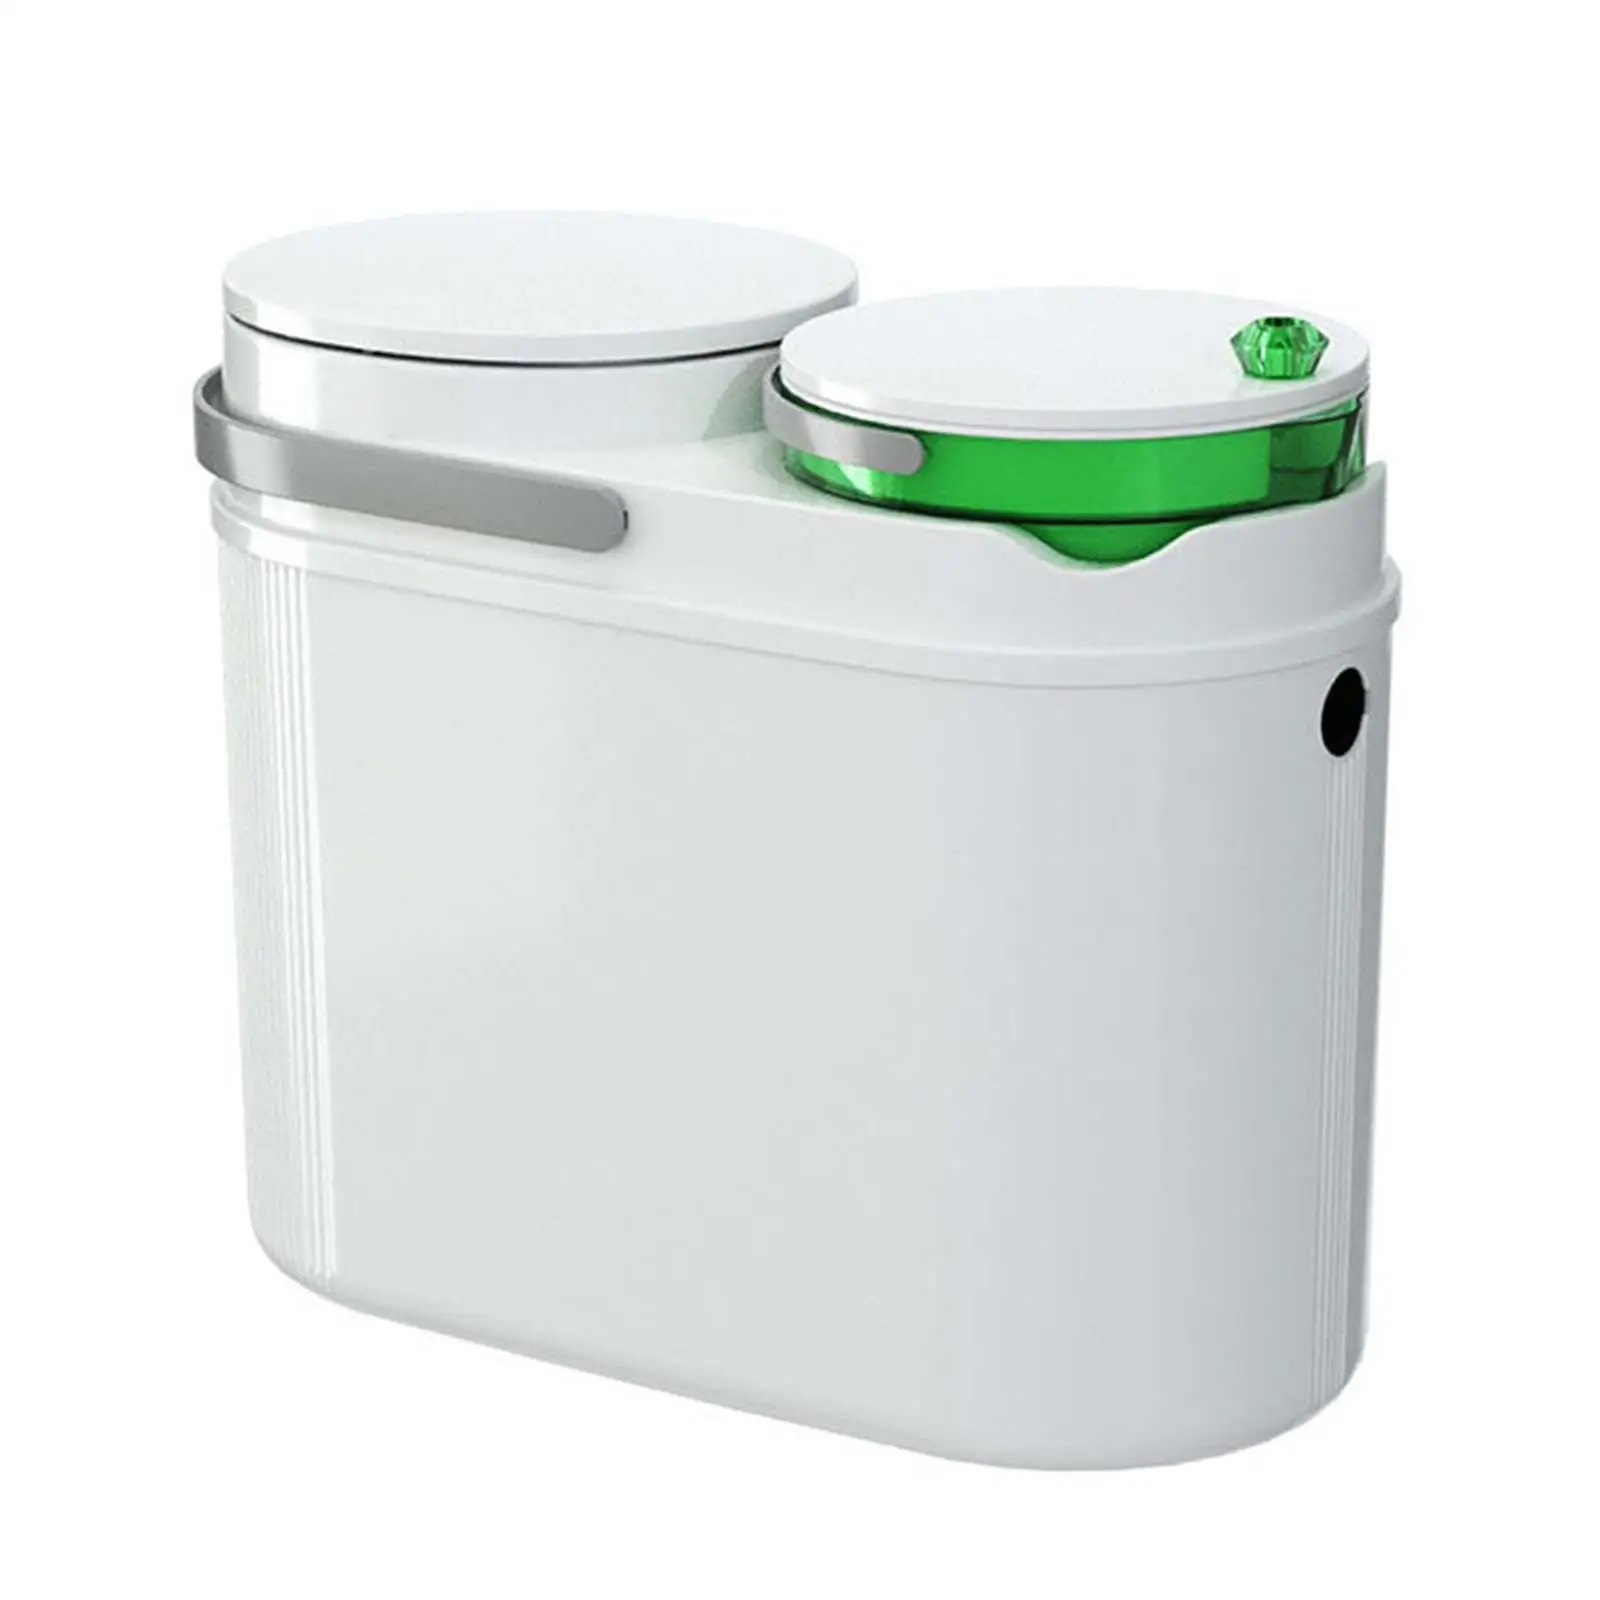 Wet and Dry Dual Trash Can Tea Capacity with Spring Lid Classified Wet and Dry Classified Rubbish Bin for Dorm Bathroom Kitchen